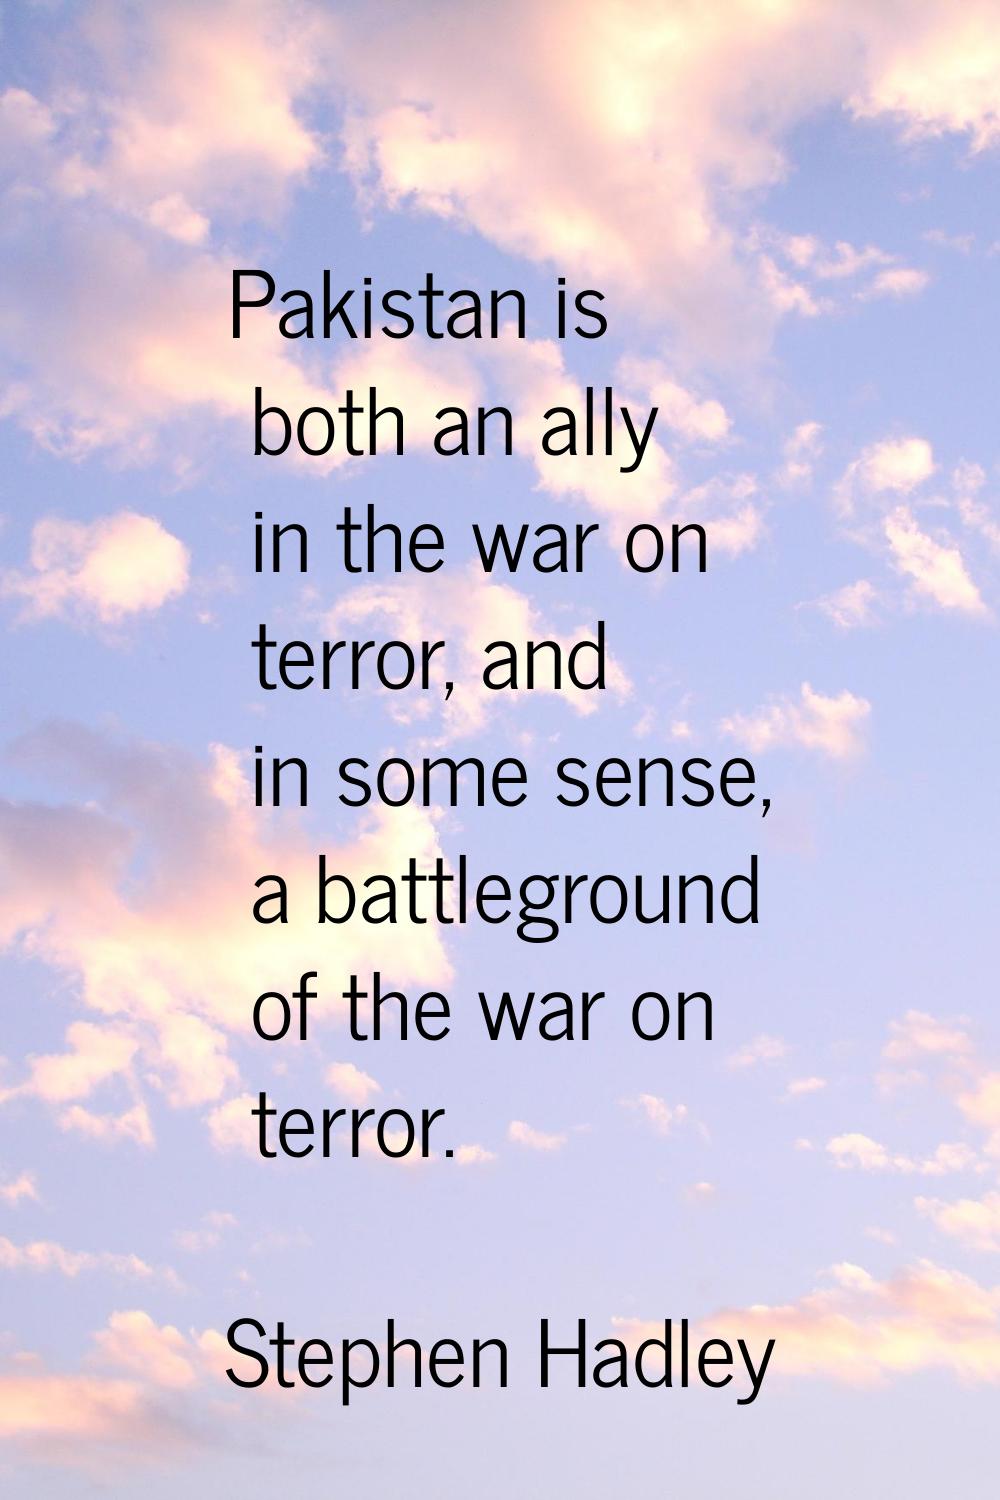 Pakistan is both an ally in the war on terror, and in some sense, a battleground of the war on terr